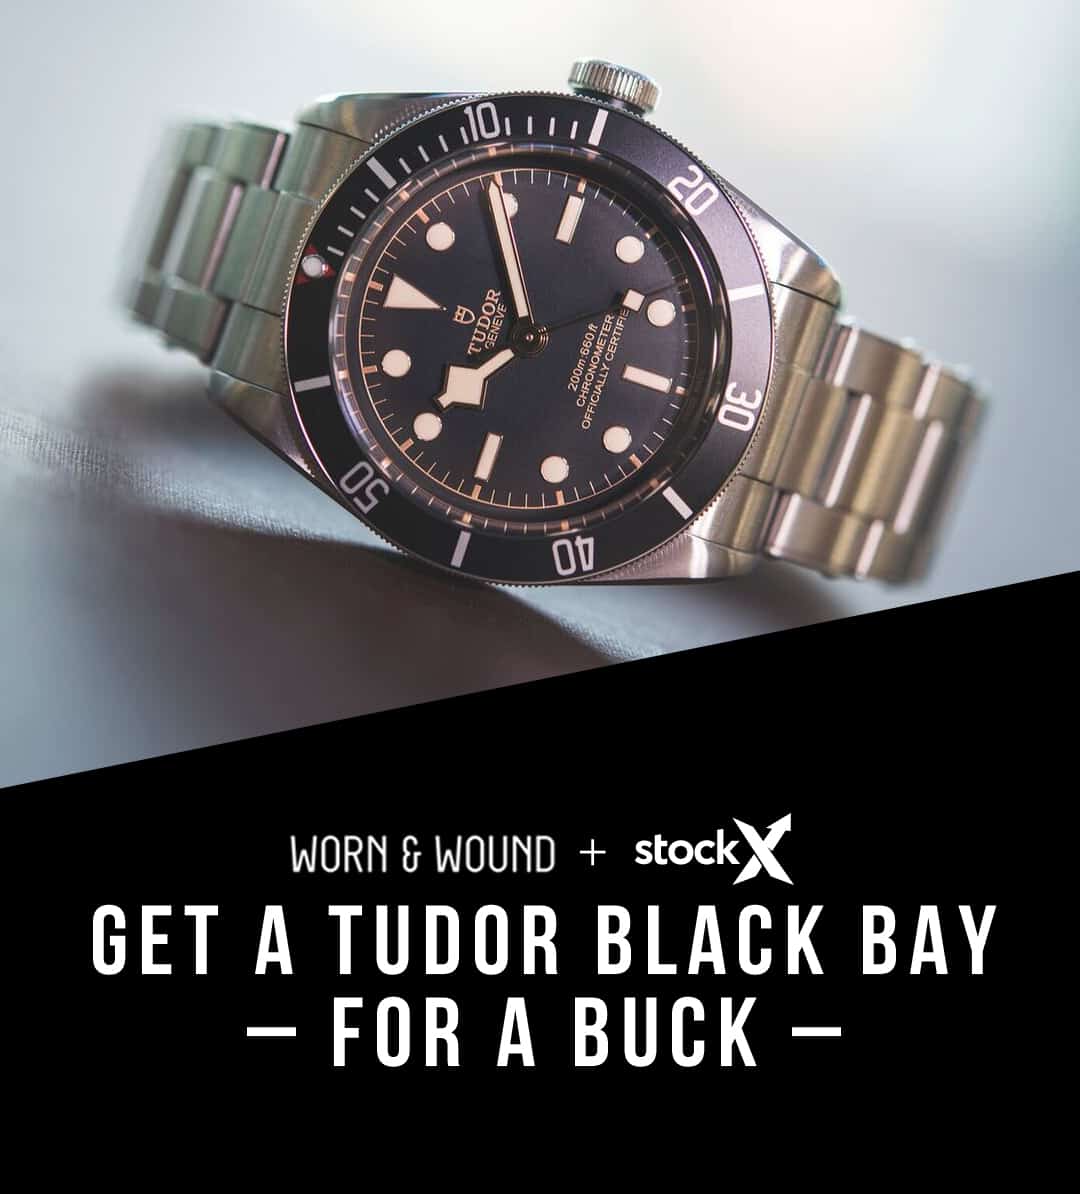 Buy This Tudor Black Bay for $1 From StockX